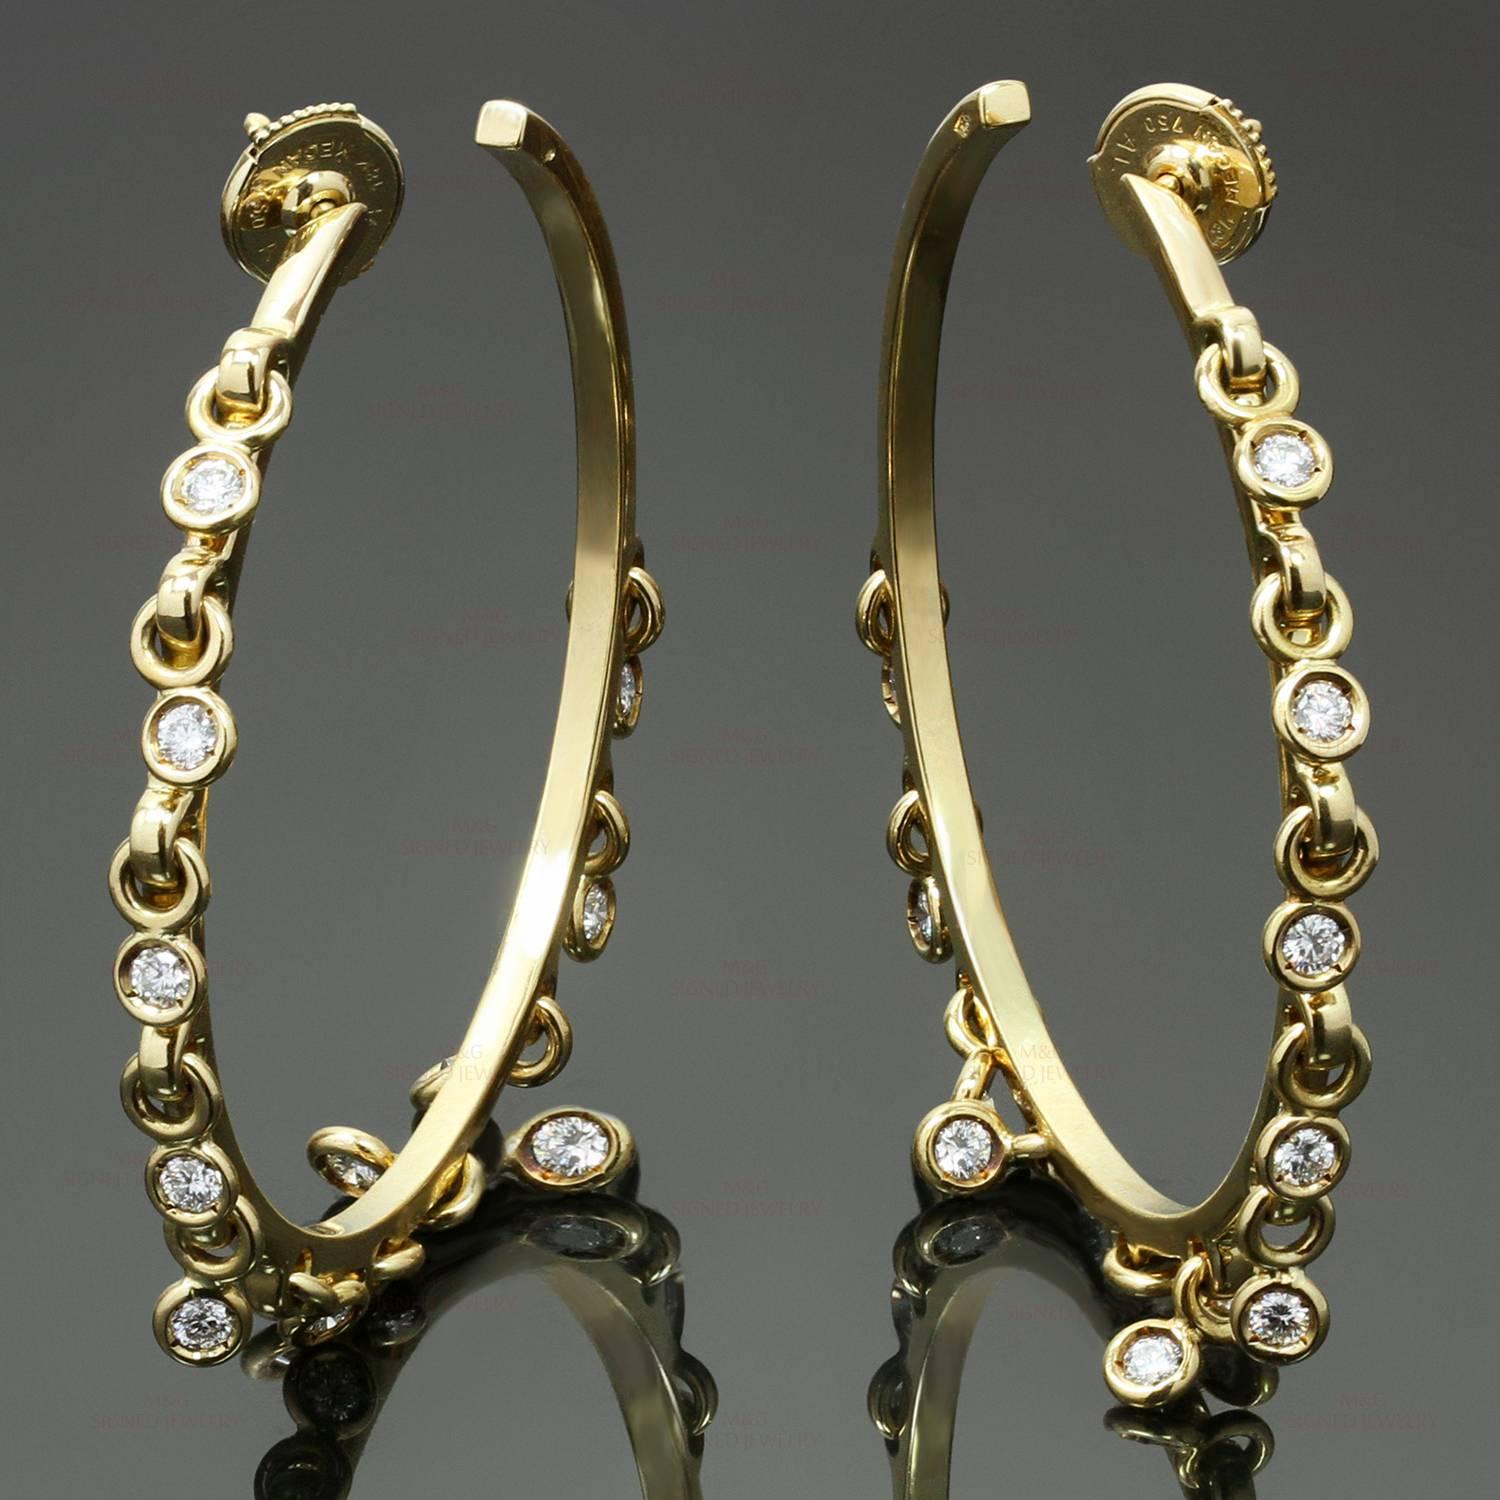 These gorgeous Christian Dior hoop earrings are crafted in 18k white gold and feature dangling hoops bezel-set with brilliant-cut round diamonds of an estimated 1.20 carats. Made in France circa 2000s. Measurements: 1.73" (44mm) length. 